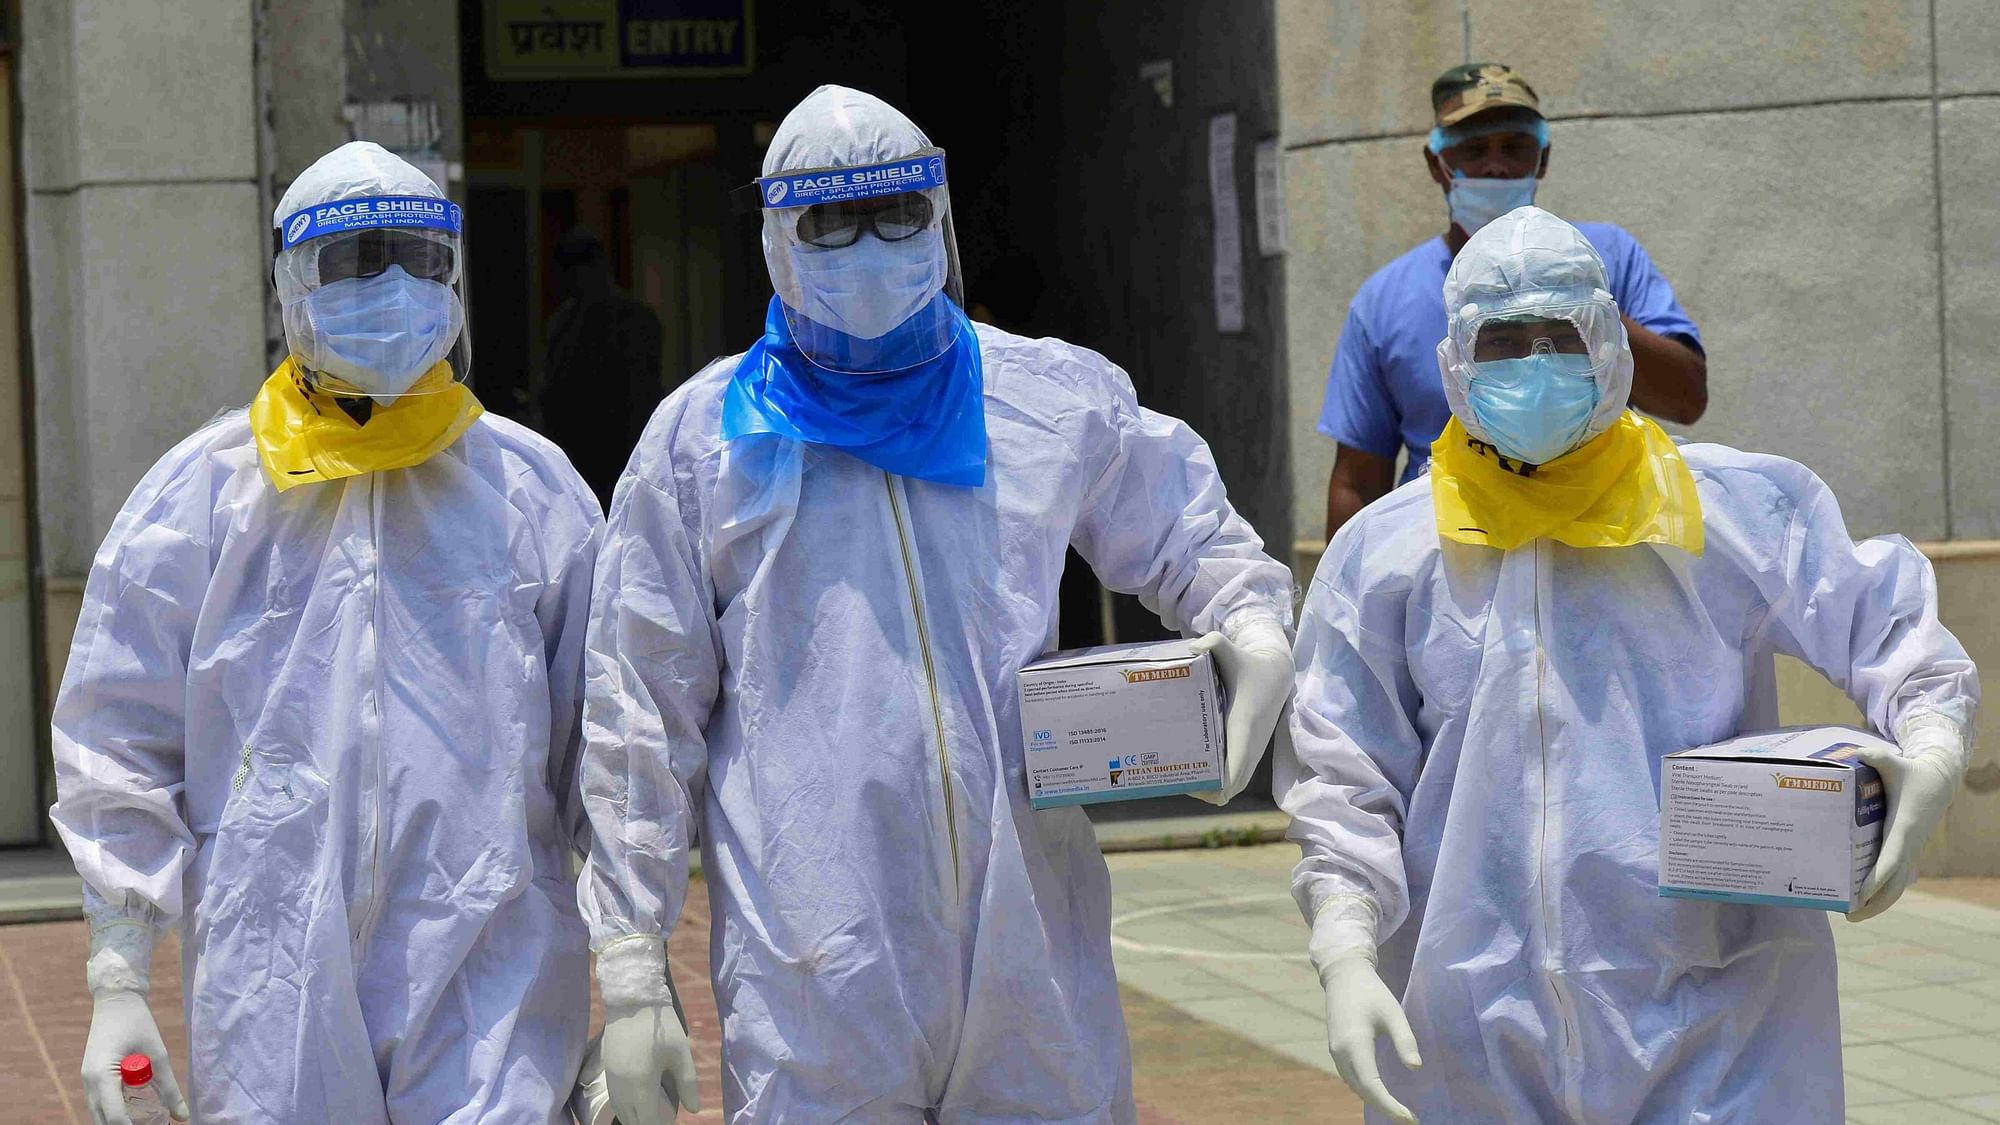 Medics arrive to take samples of suspected COVID-19 patients for lab tests at a government hospital in New Delhi on 10 June. &nbsp;